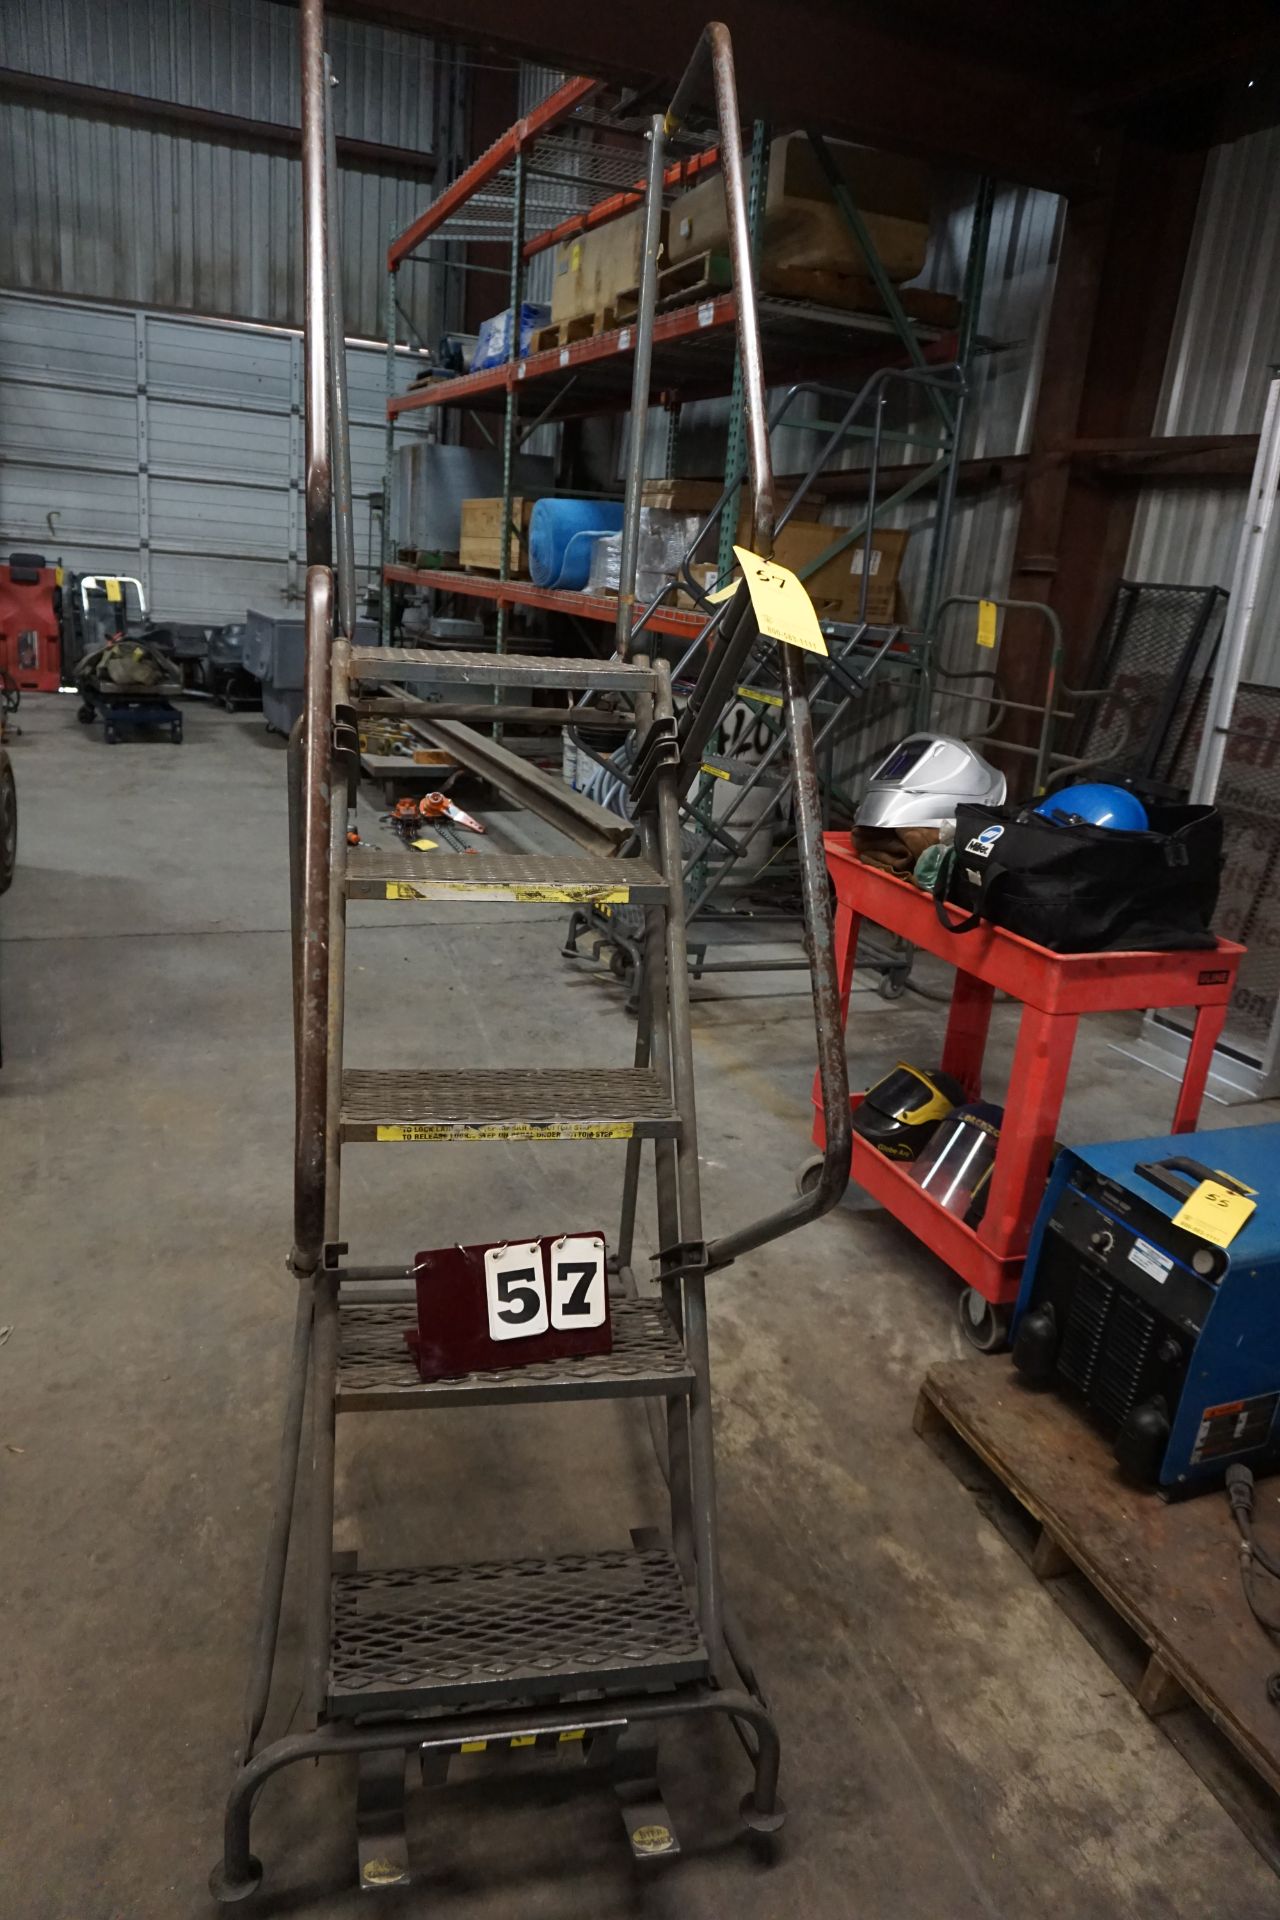 Ballymore 5 step Portable Warehouse Ladder (LOCATION: 3421 N Sylvania Ave, Ft Worth TX 76111)